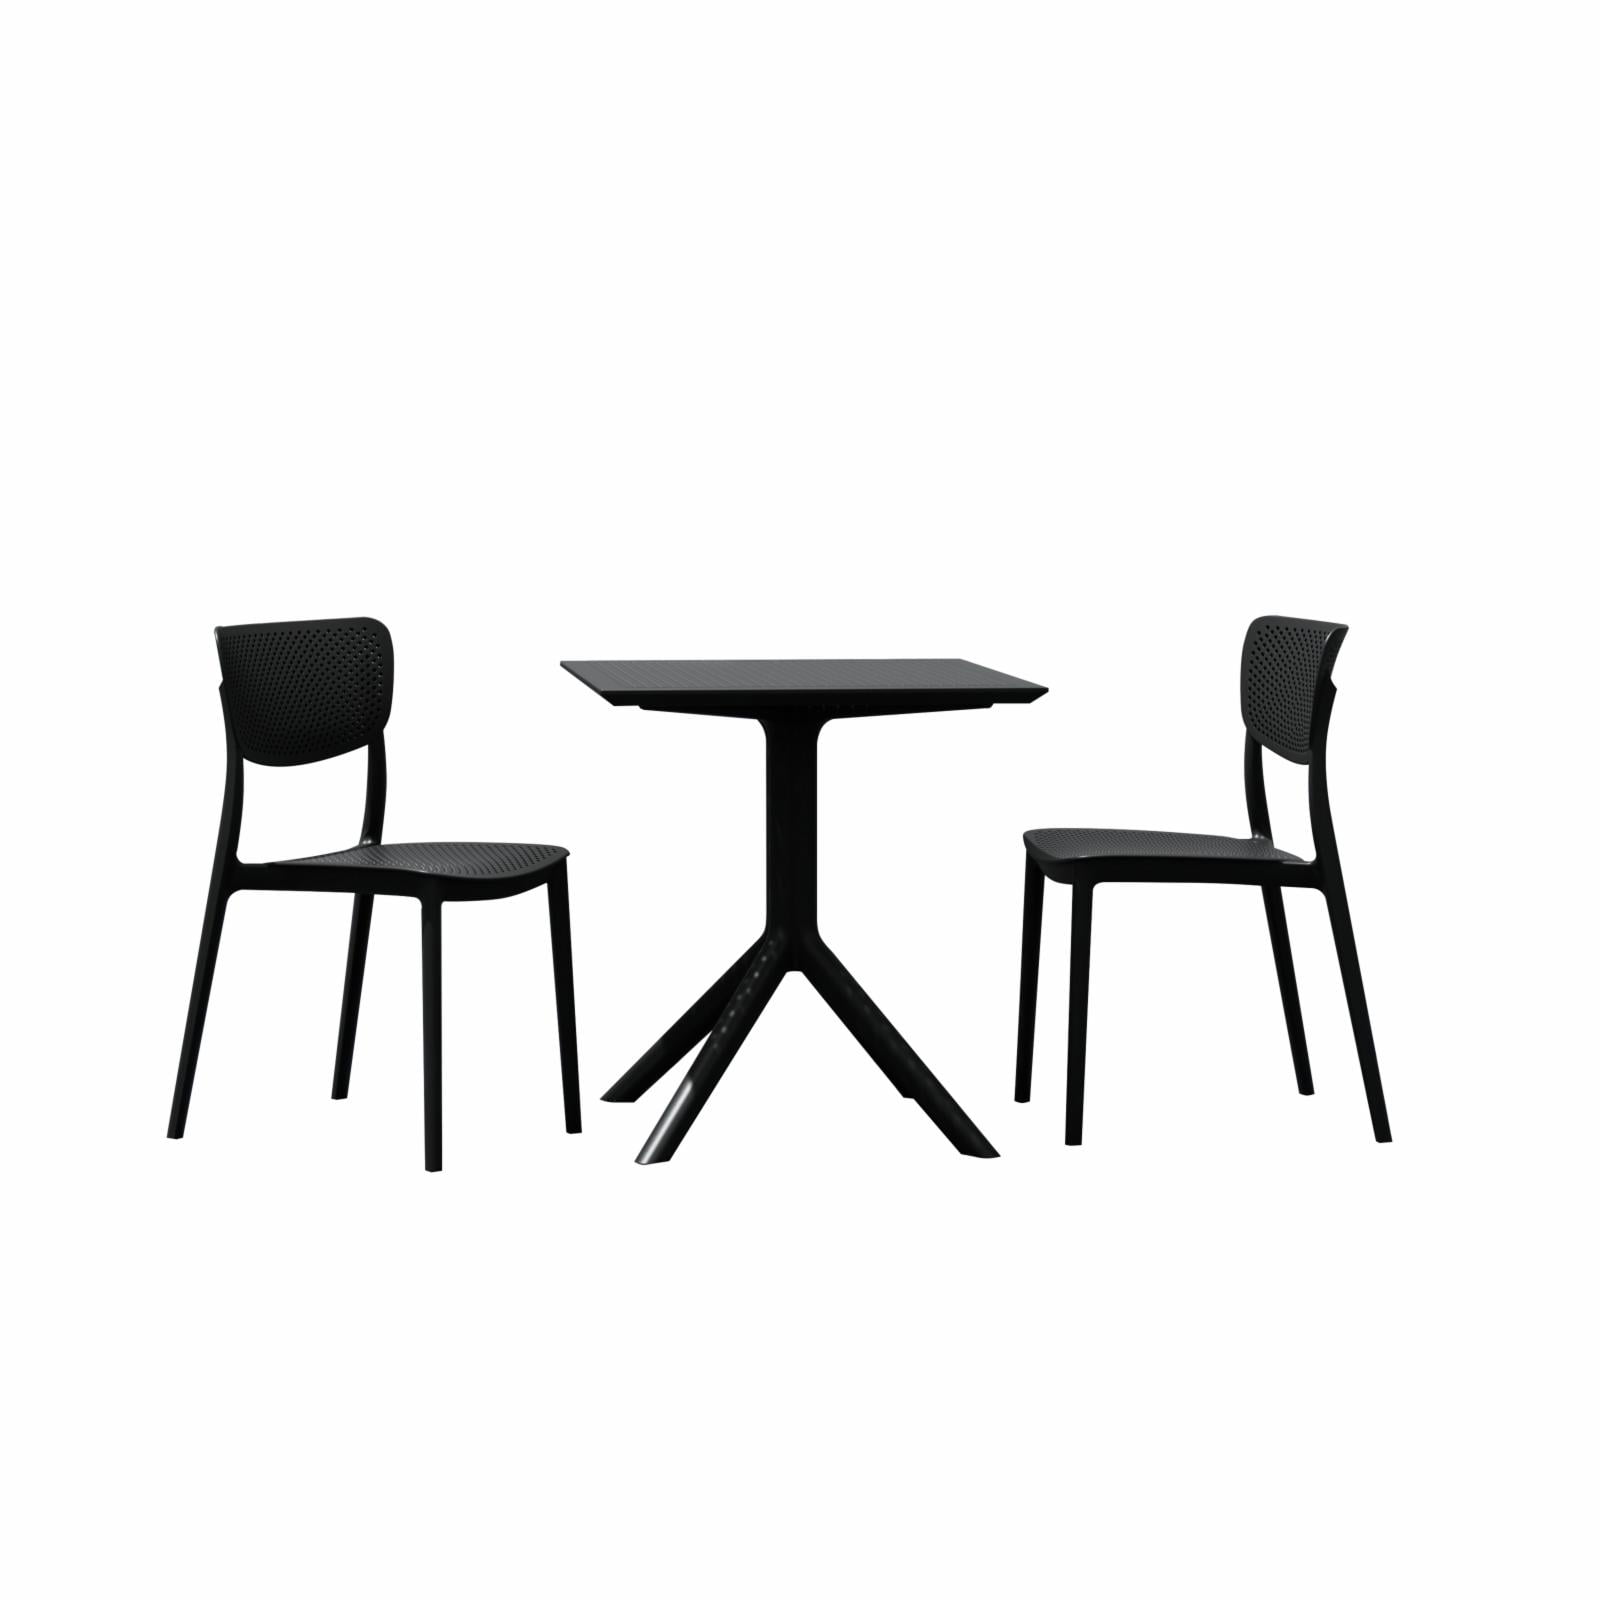 Isp1291s-bla Lucy Outdoor Bistro Set With 24 In. Table Top, Black - 3 Piece